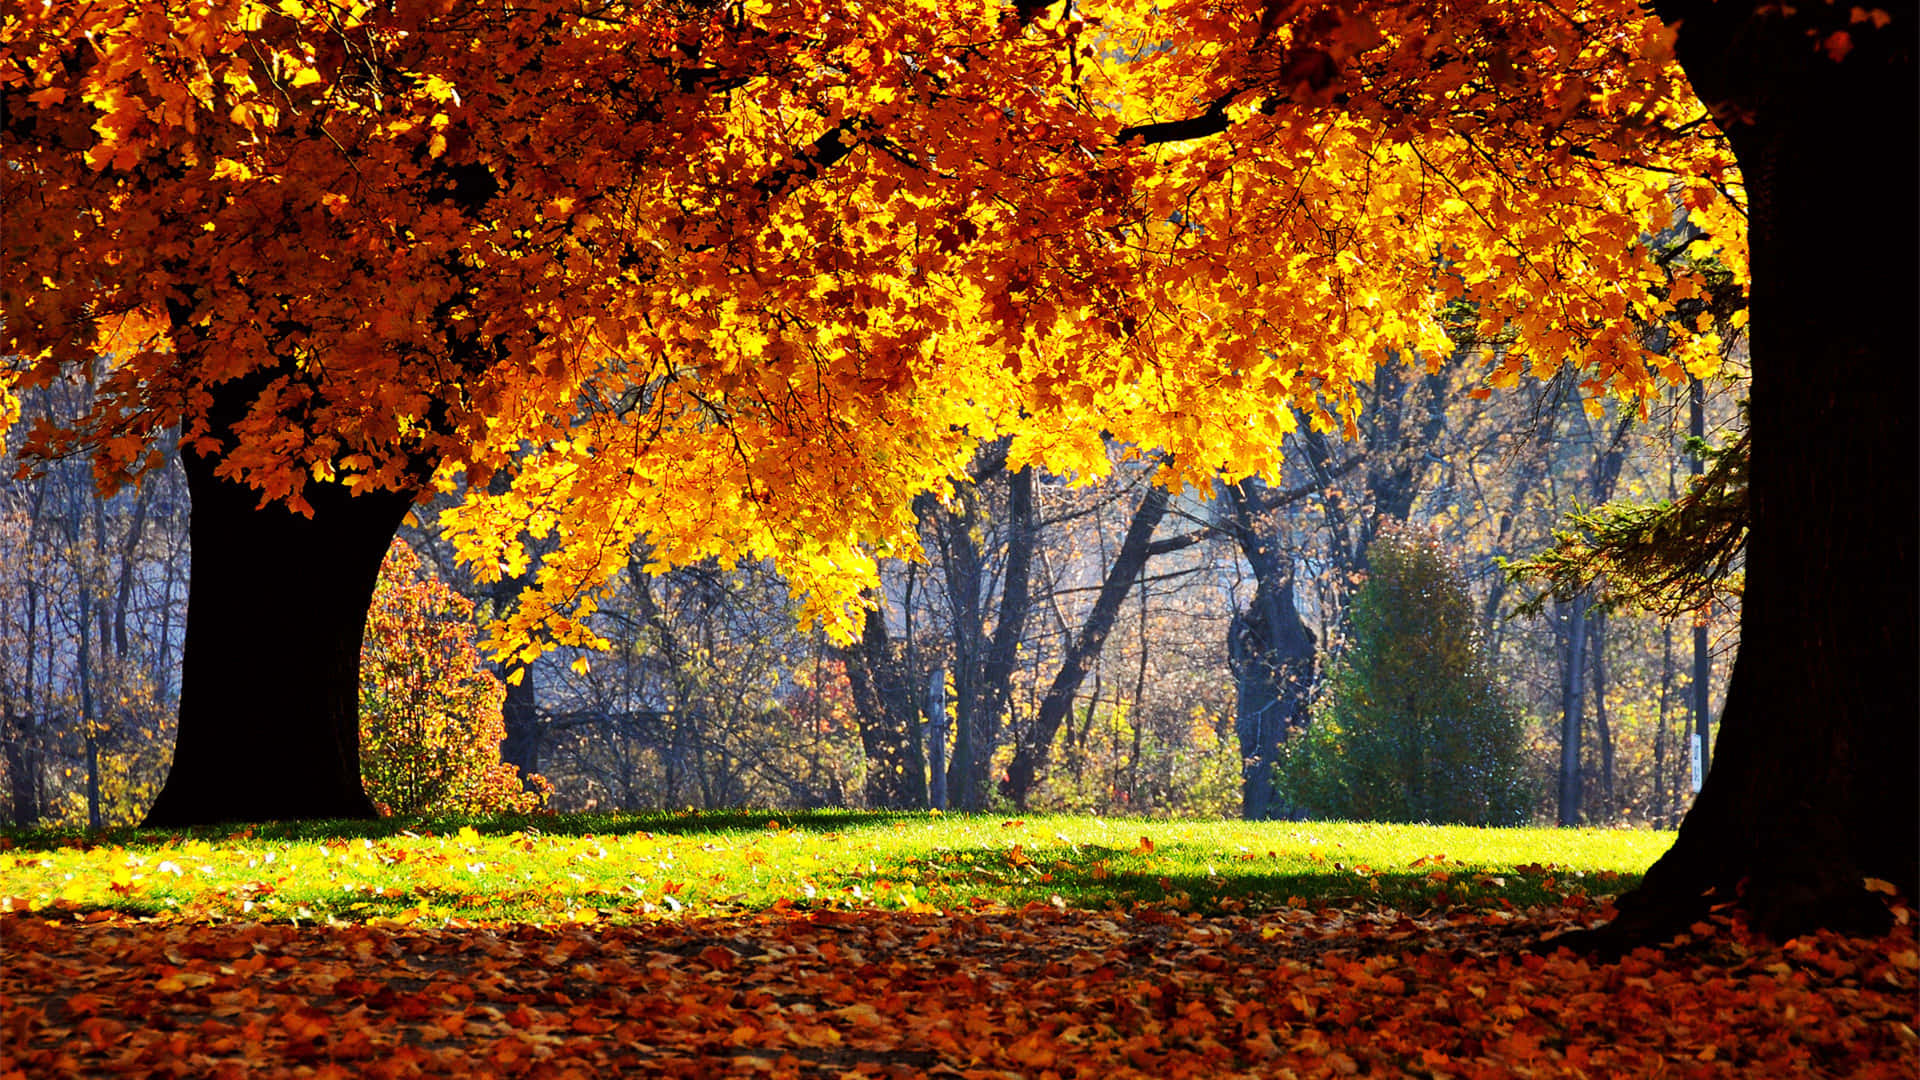 Enjoy the beauty of nature during the fall season! Wallpaper